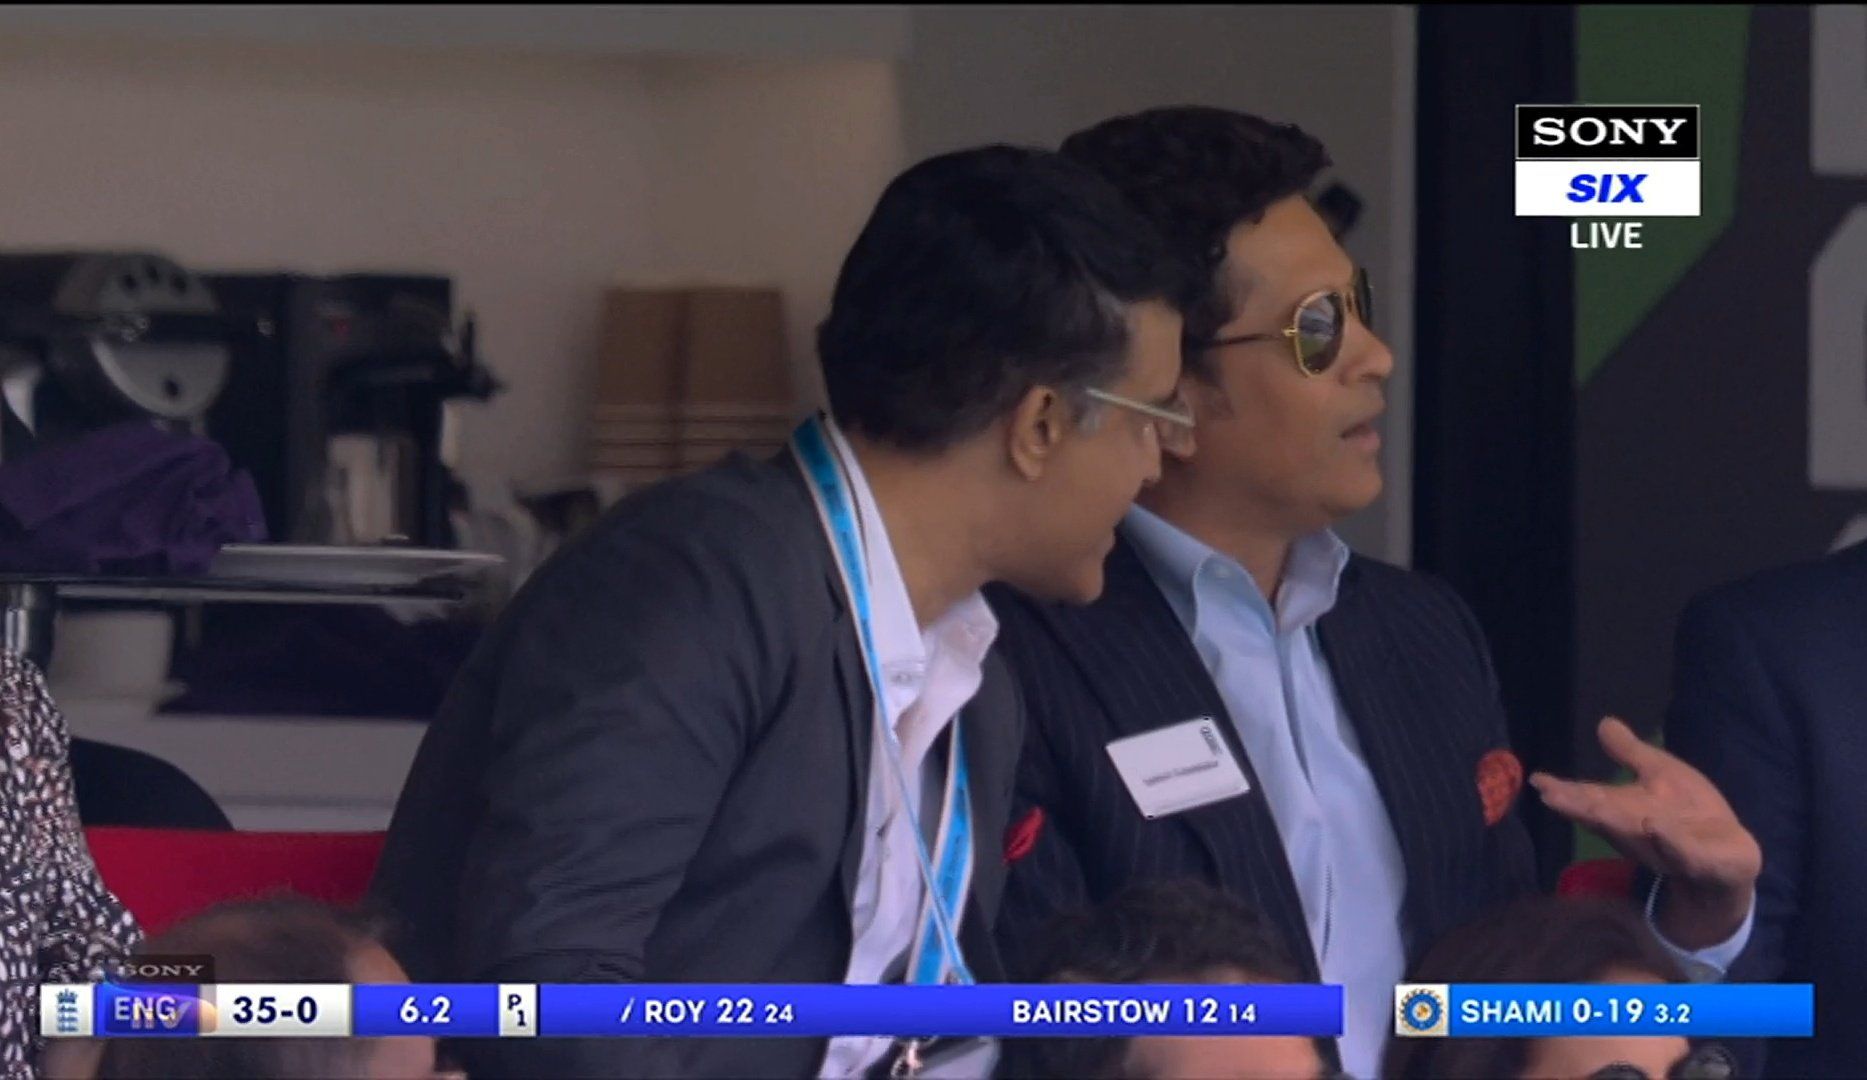 Former Indian cricketers Tendulkar, Ganguly, others spotted at Lord’s, see photos